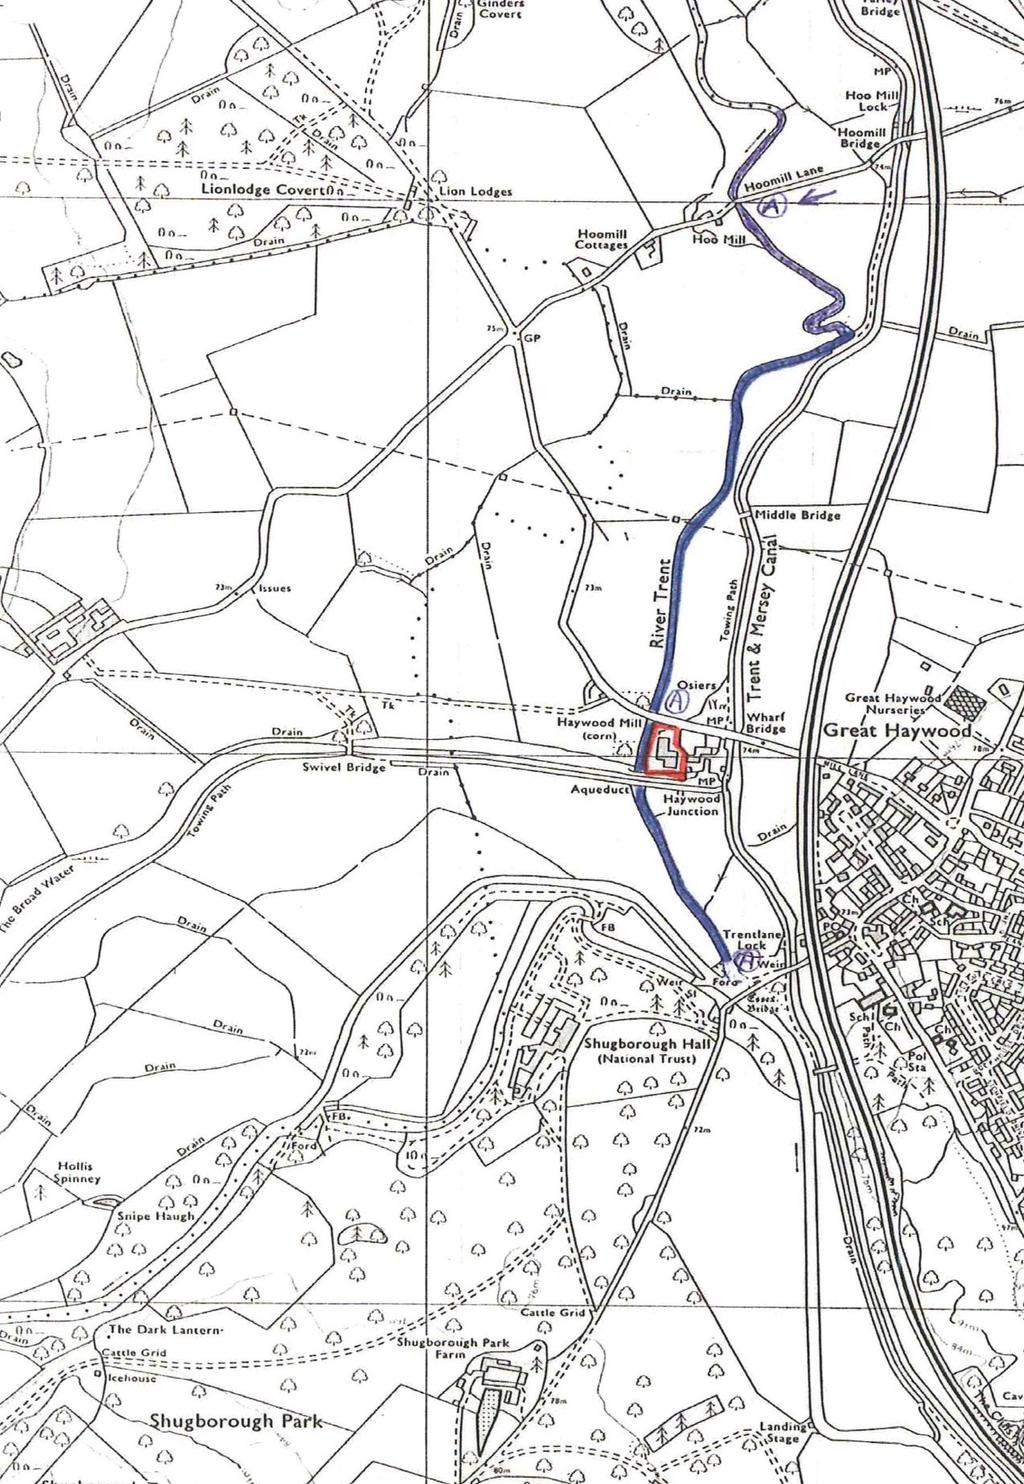 PLAN 1: LOCATION PLAN SHOWING ACCESS POINTS TO THE RIVER TRENT